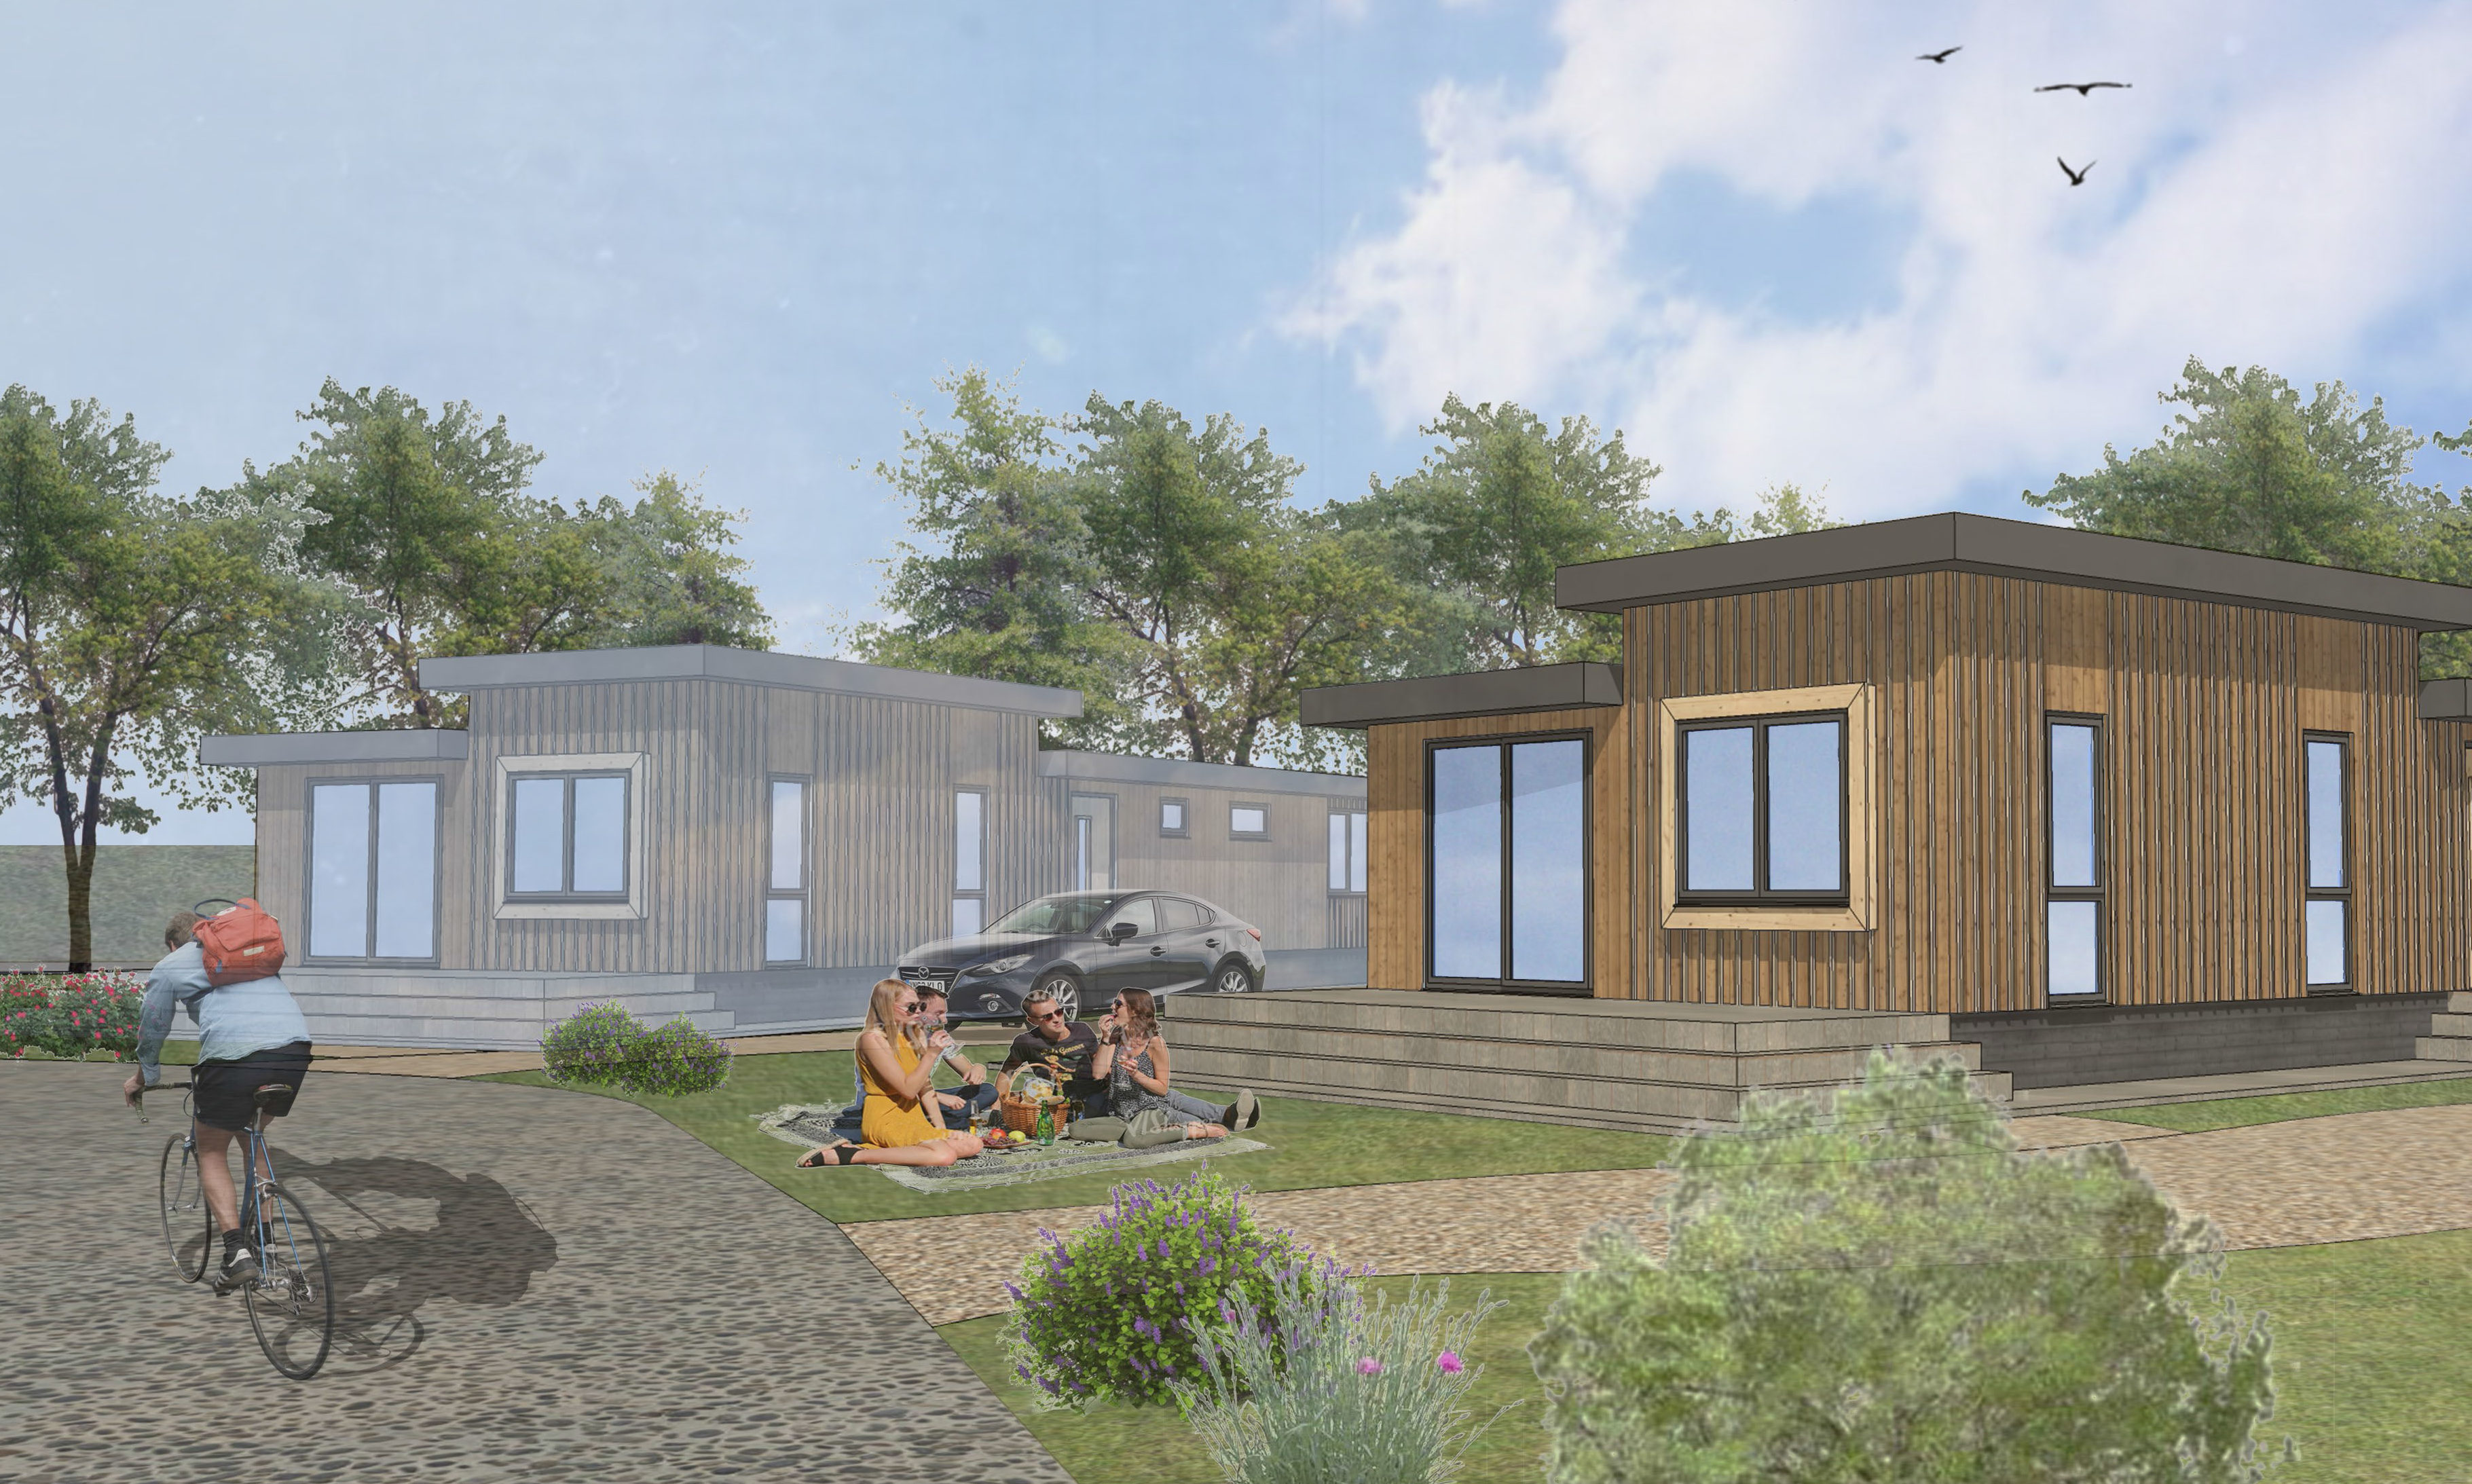 How the new lodges could look